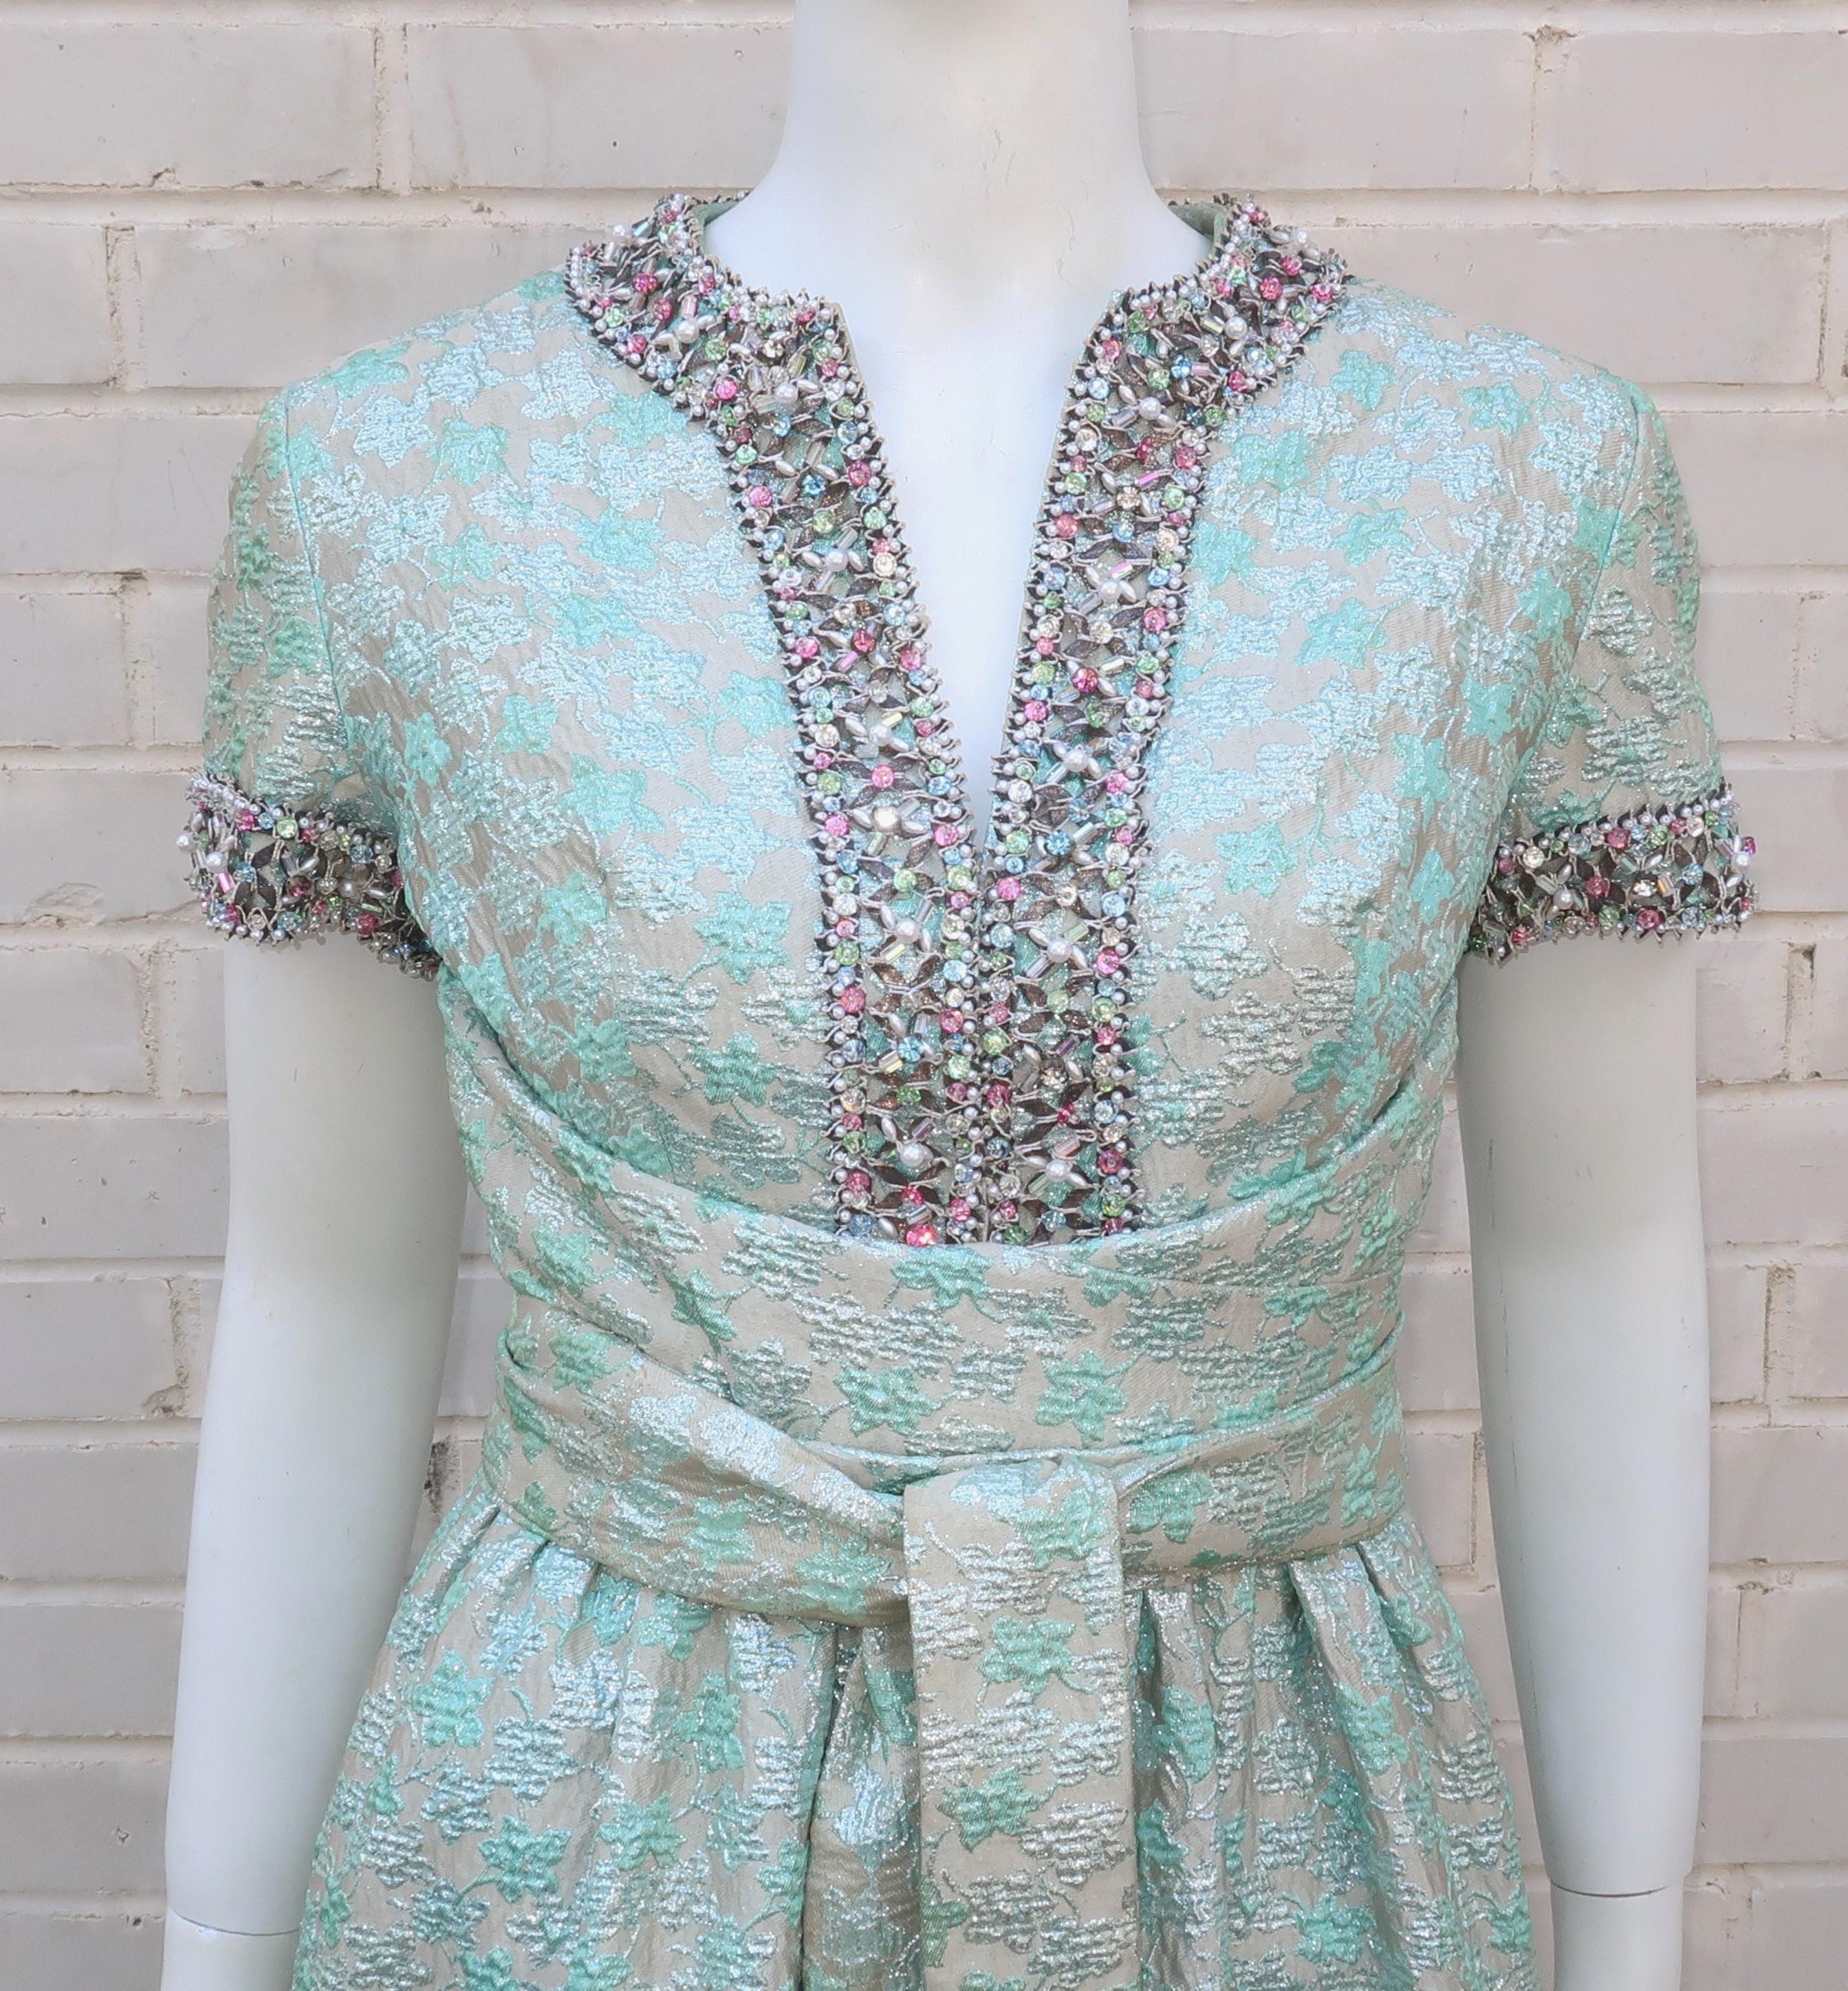 This 1968 brocade evening dress was created during Oscar de La Renta's time as head designer for Jane Derby and exemplifies his opulent style.  The silvery metallic fabric has a light background with a sea mist green floral design and is embellished